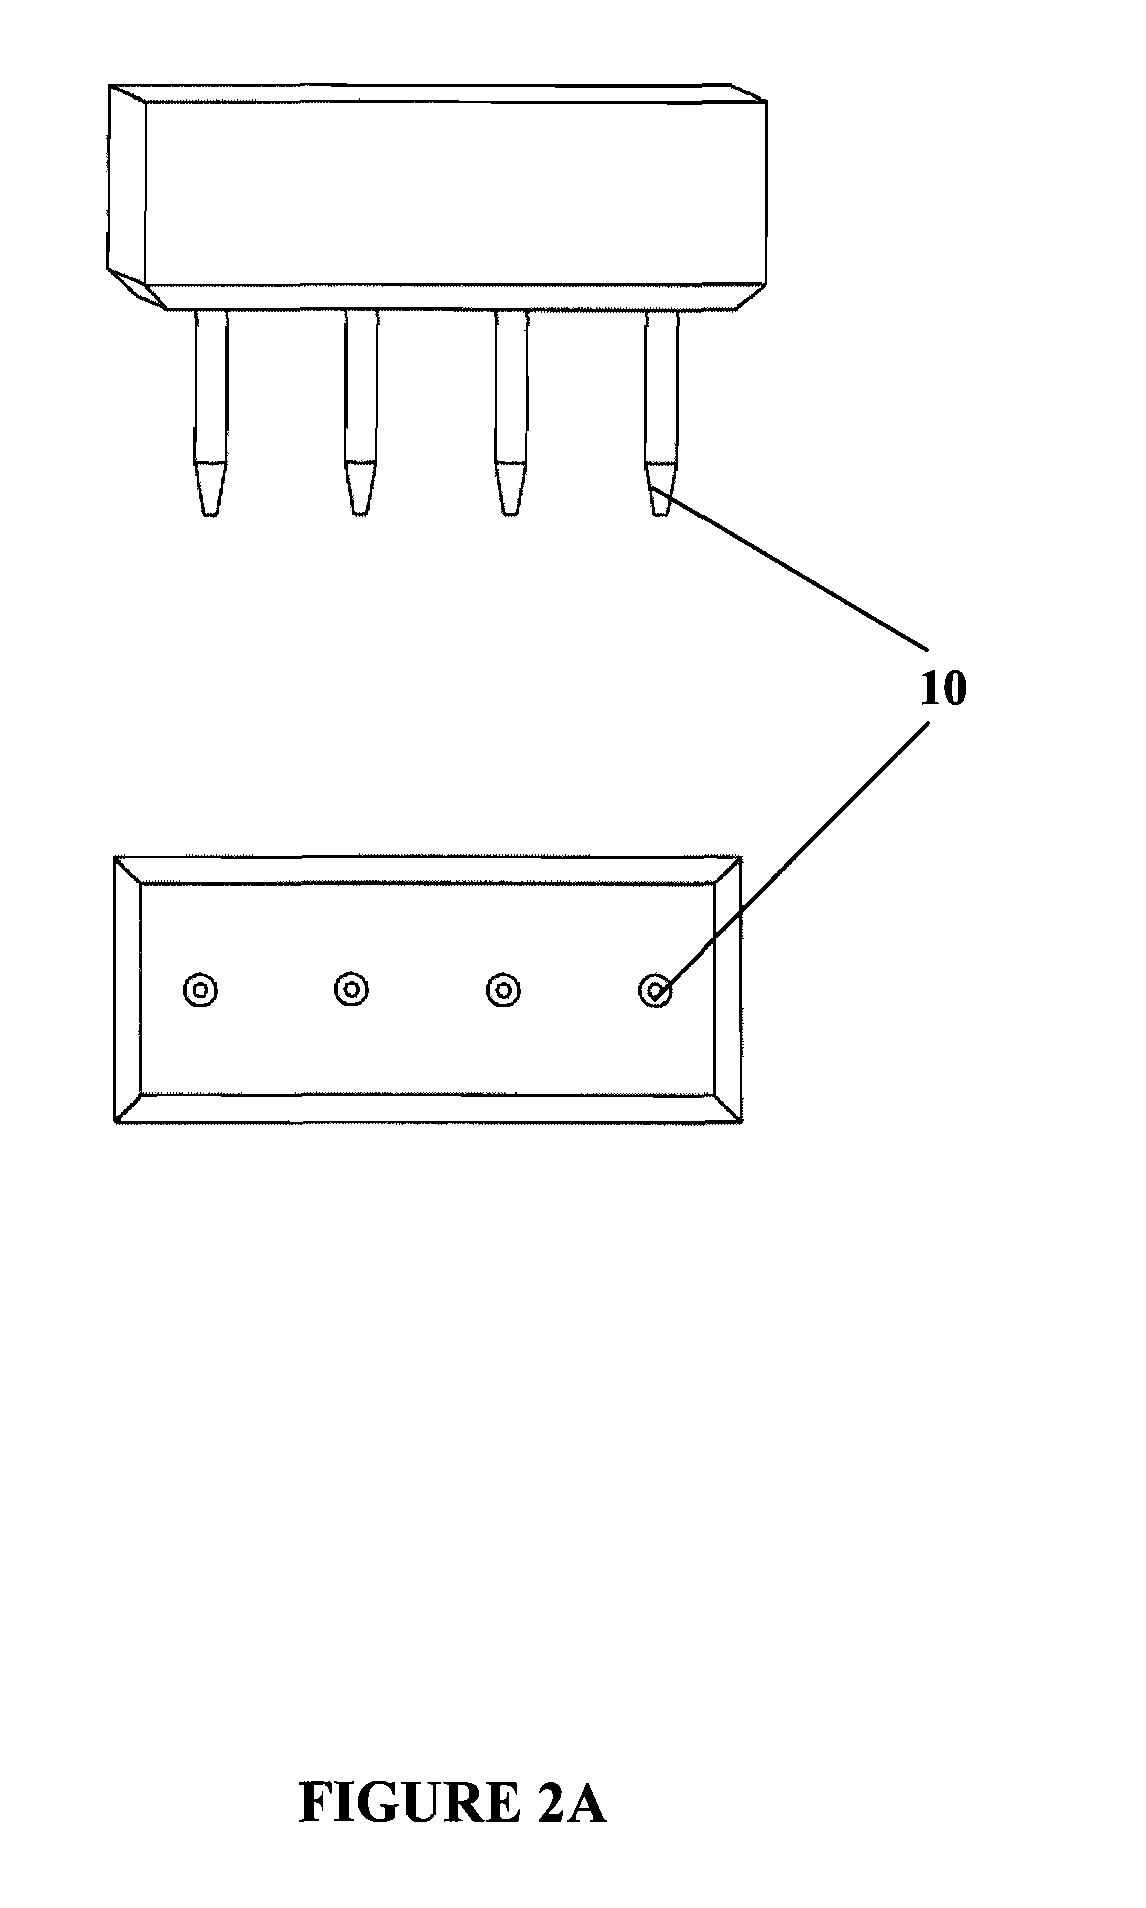 Aerosol Jet (R) printing system for photovoltaic applications